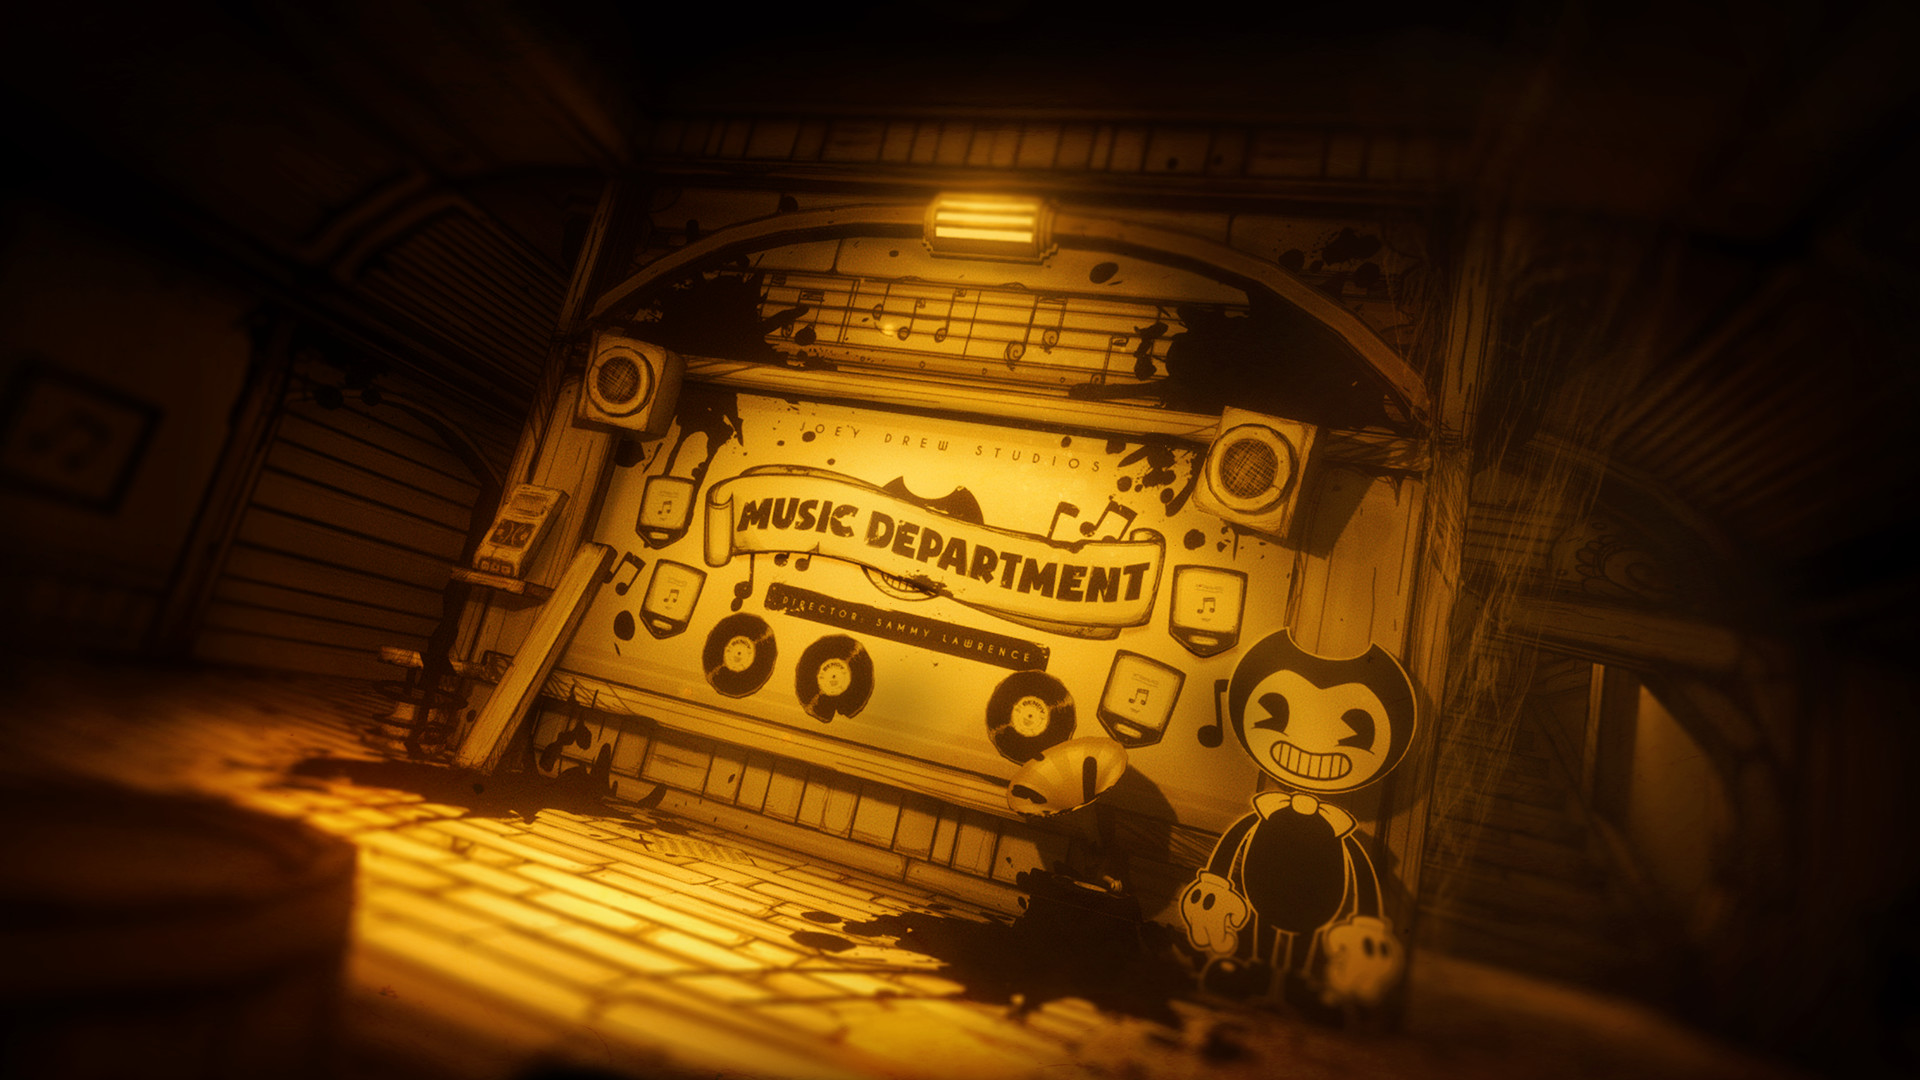 Video Game Bendy and the Ink Machine HD Wallpaper